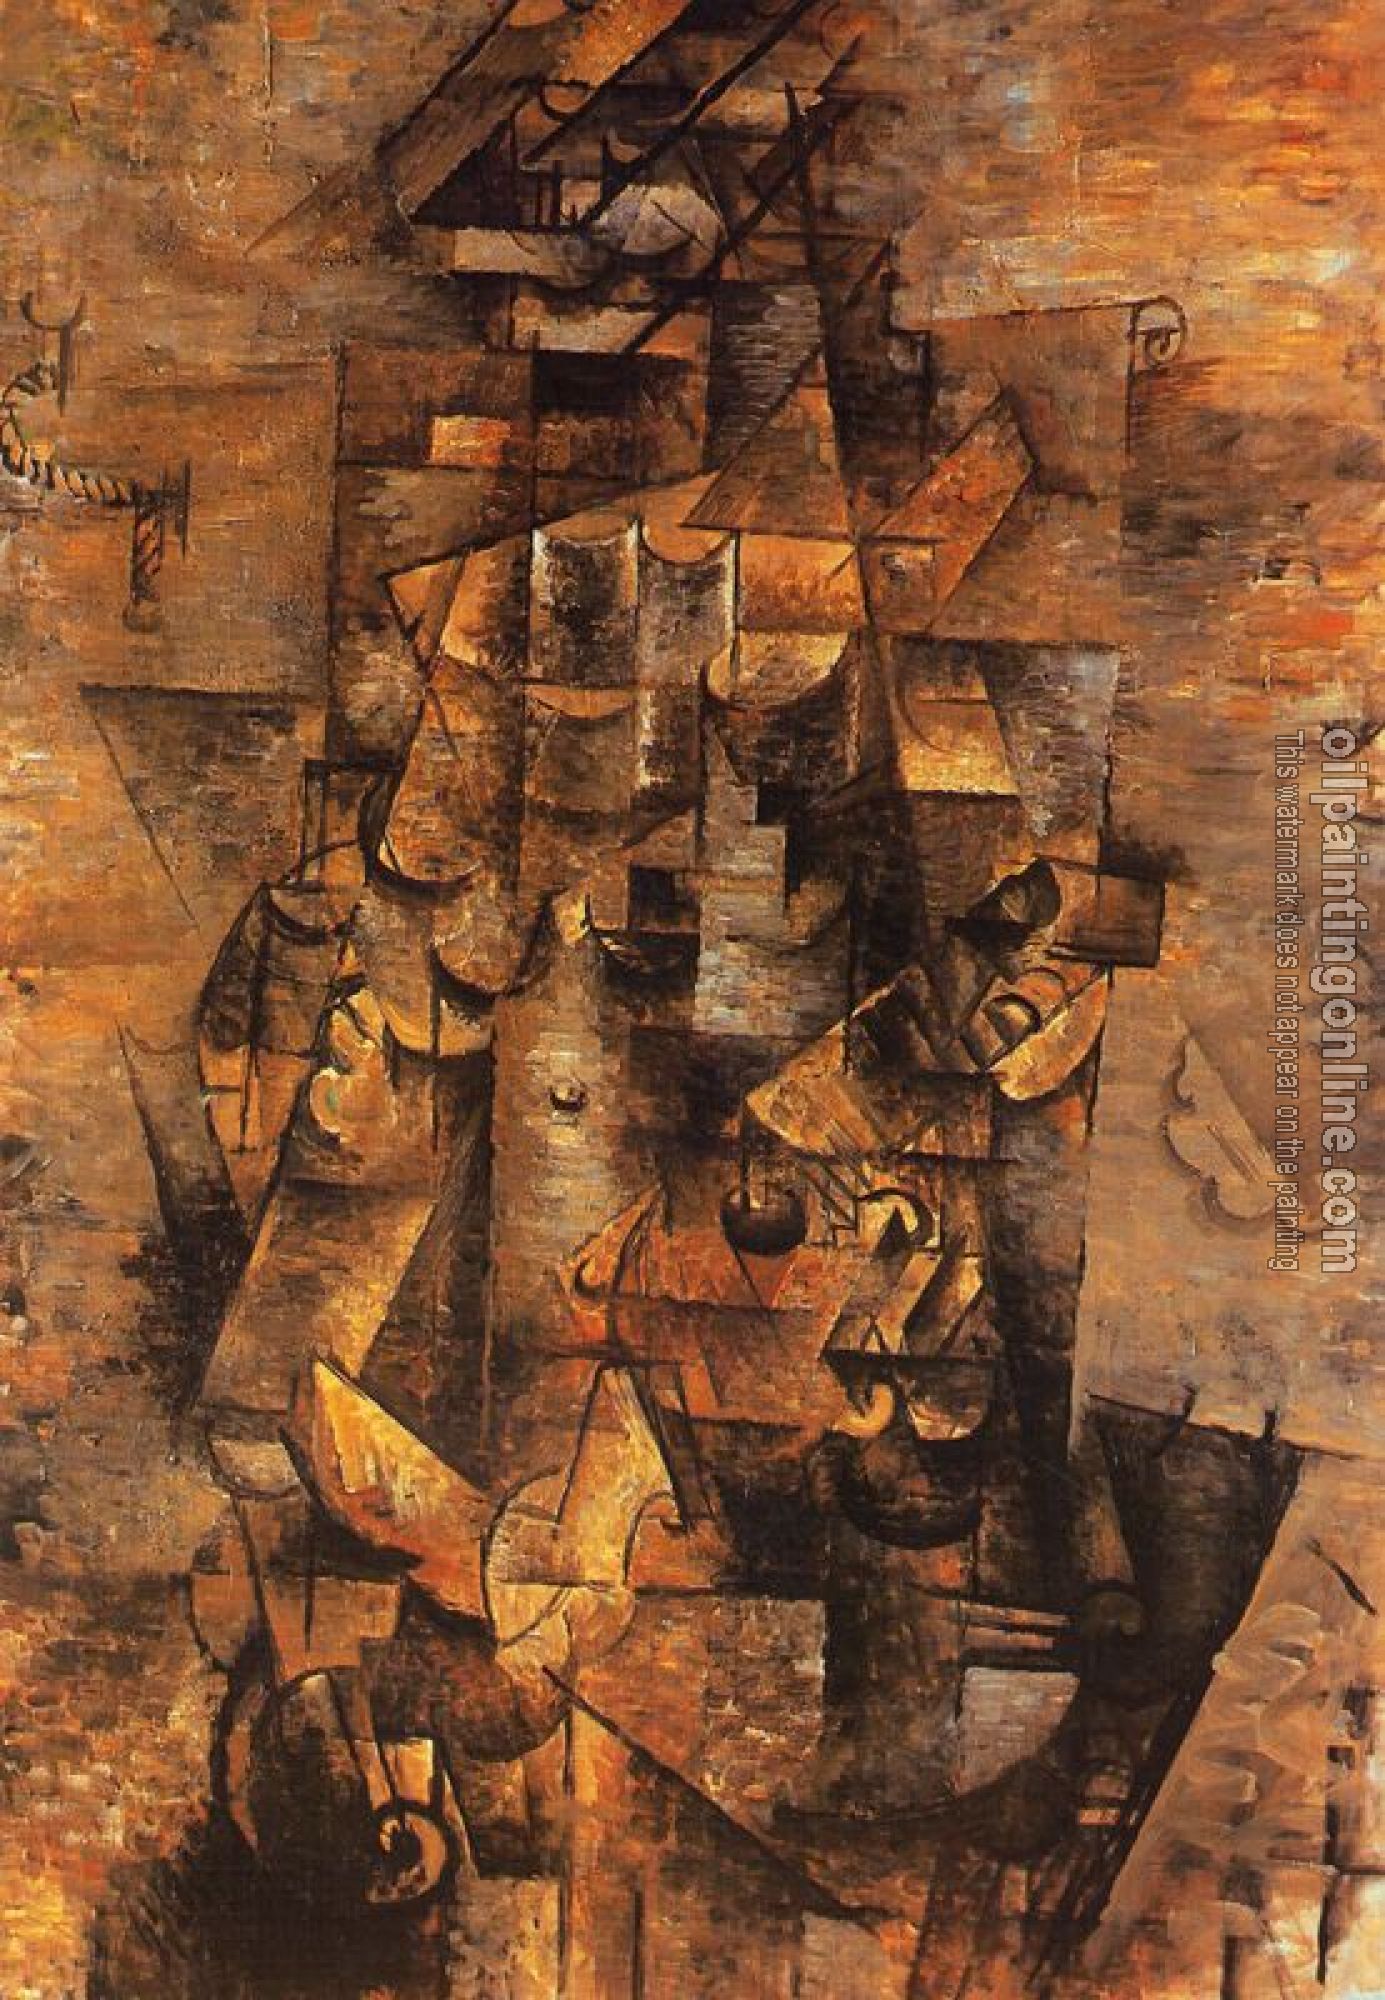 Georges Braque - Man with a Guitar